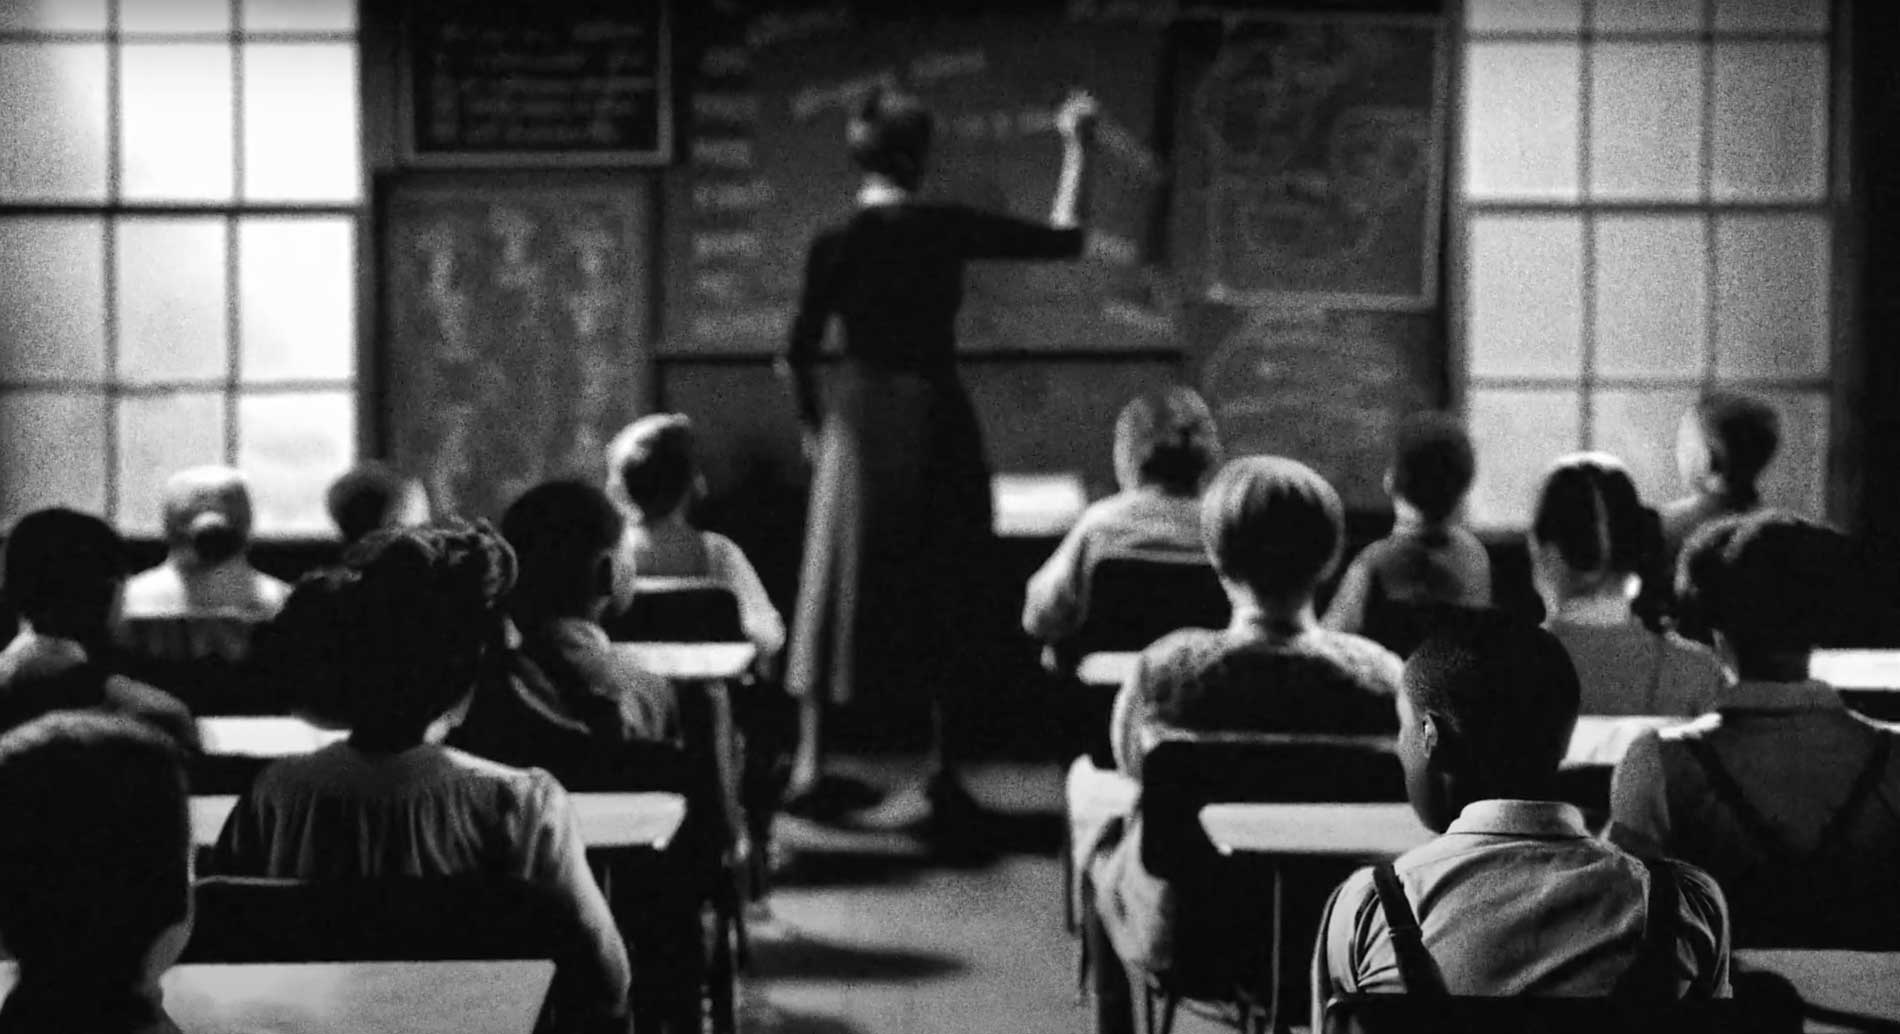 Black and white image of classroom